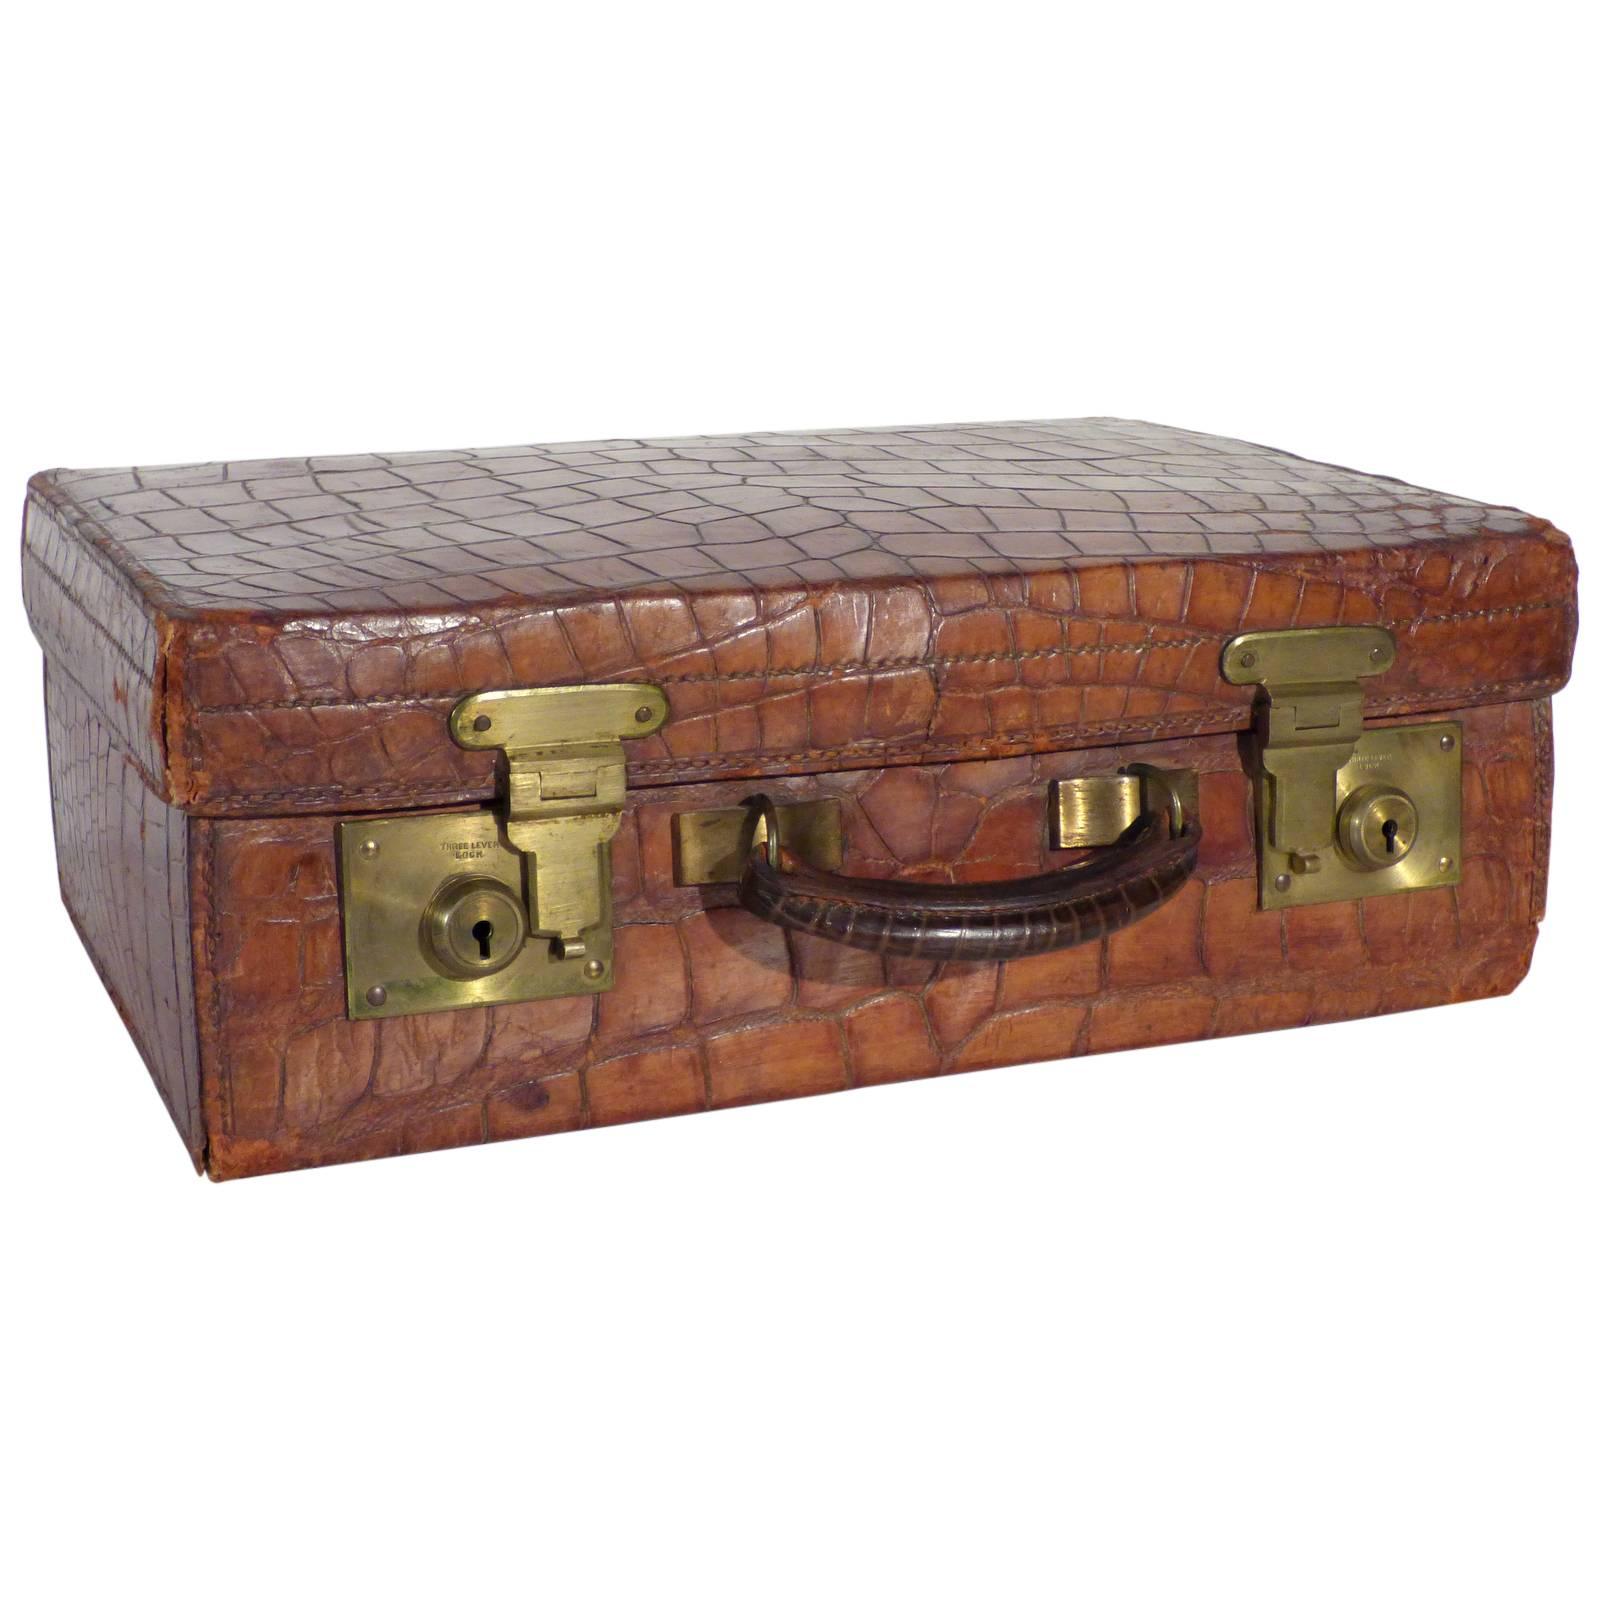 Crocodile Suitcase Luggage from Mid-20th Century For Sale